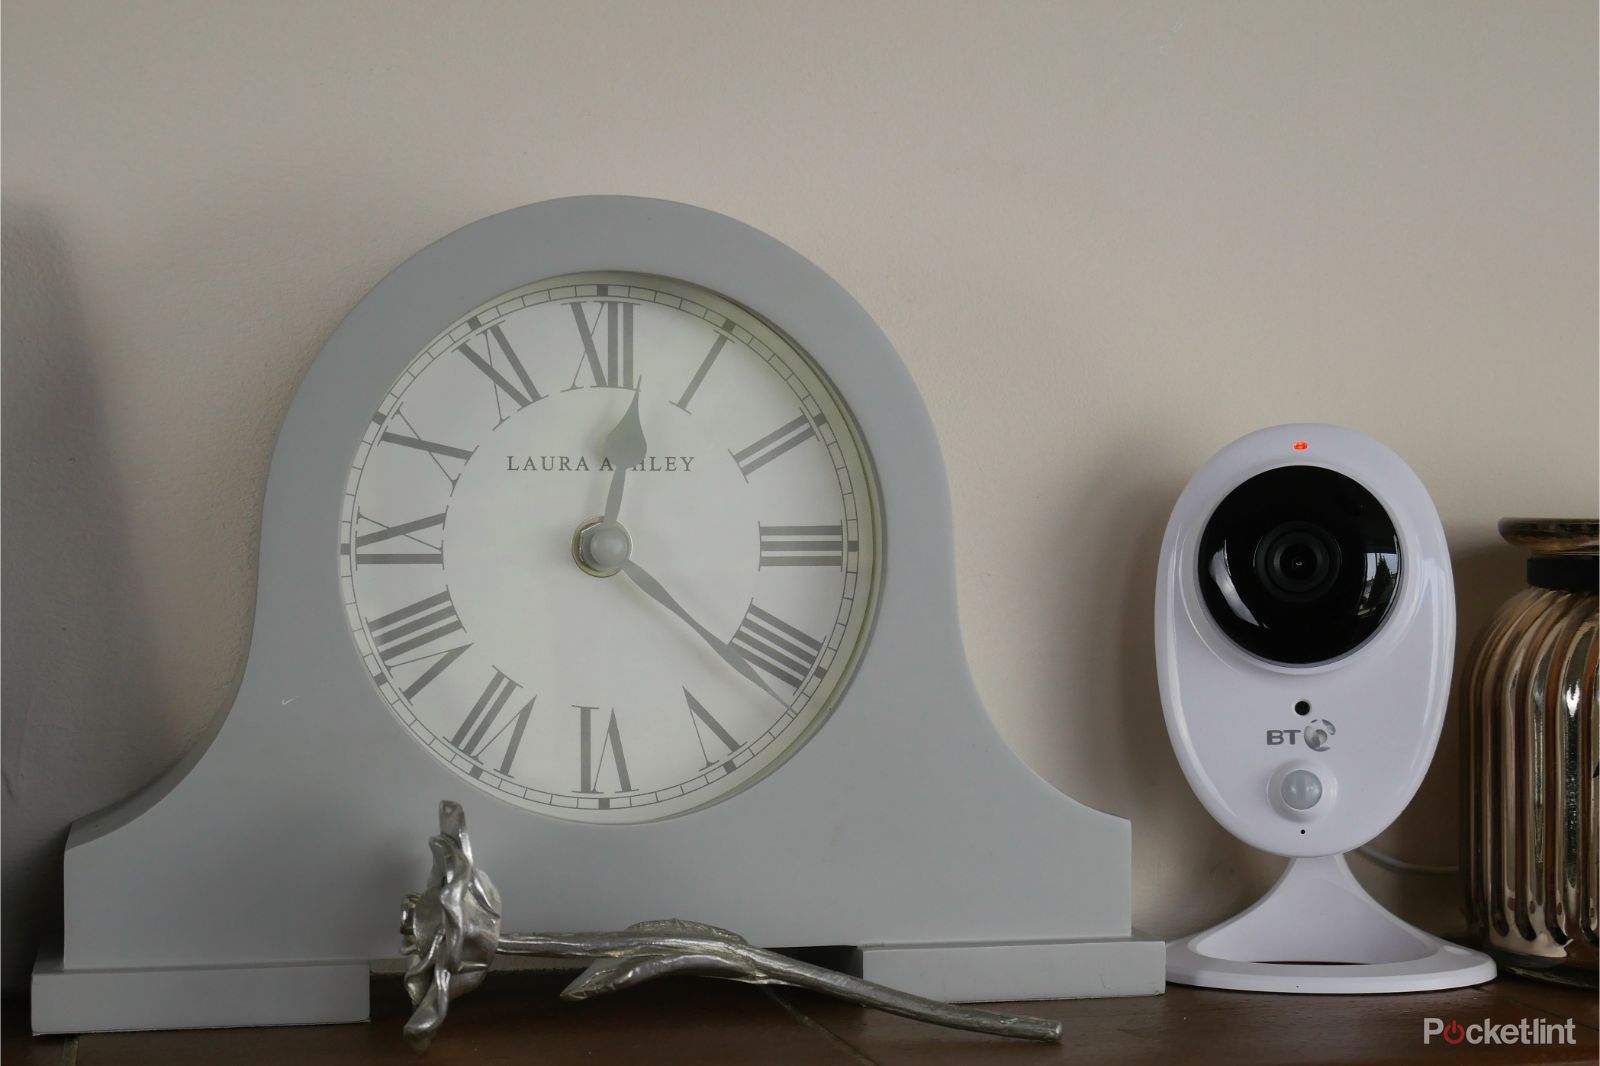 BT Smart home camera review An affordable but flawed smart home security device image 7